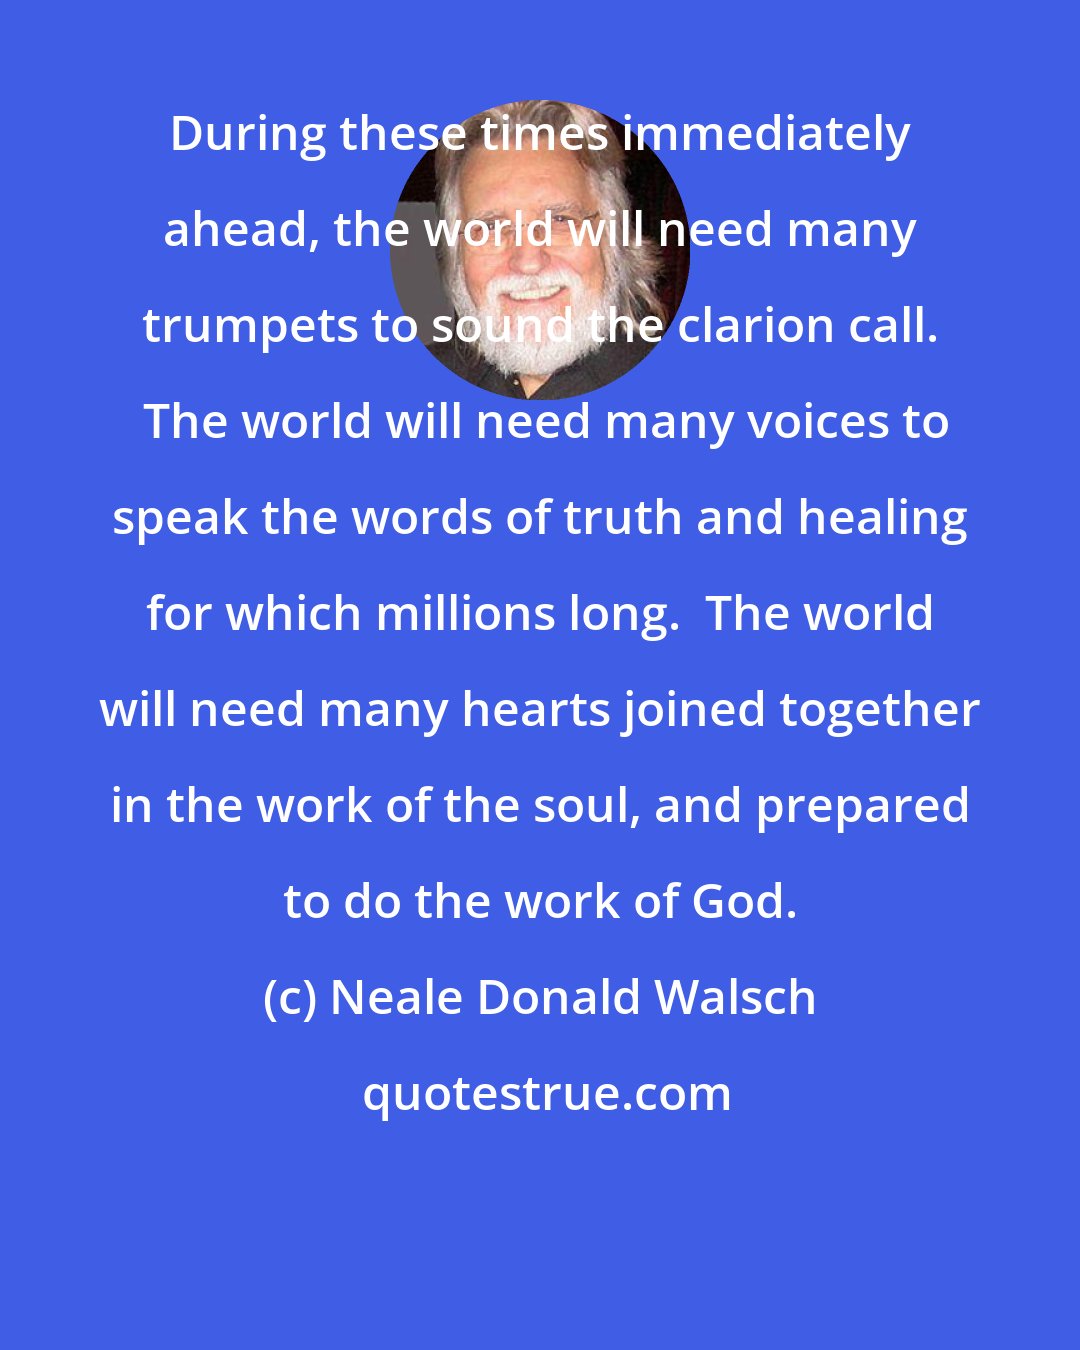 Neale Donald Walsch: During these times immediately ahead, the world will need many trumpets to sound the clarion call.  The world will need many voices to speak the words of truth and healing for which millions long.  The world will need many hearts joined together in the work of the soul, and prepared to do the work of God.